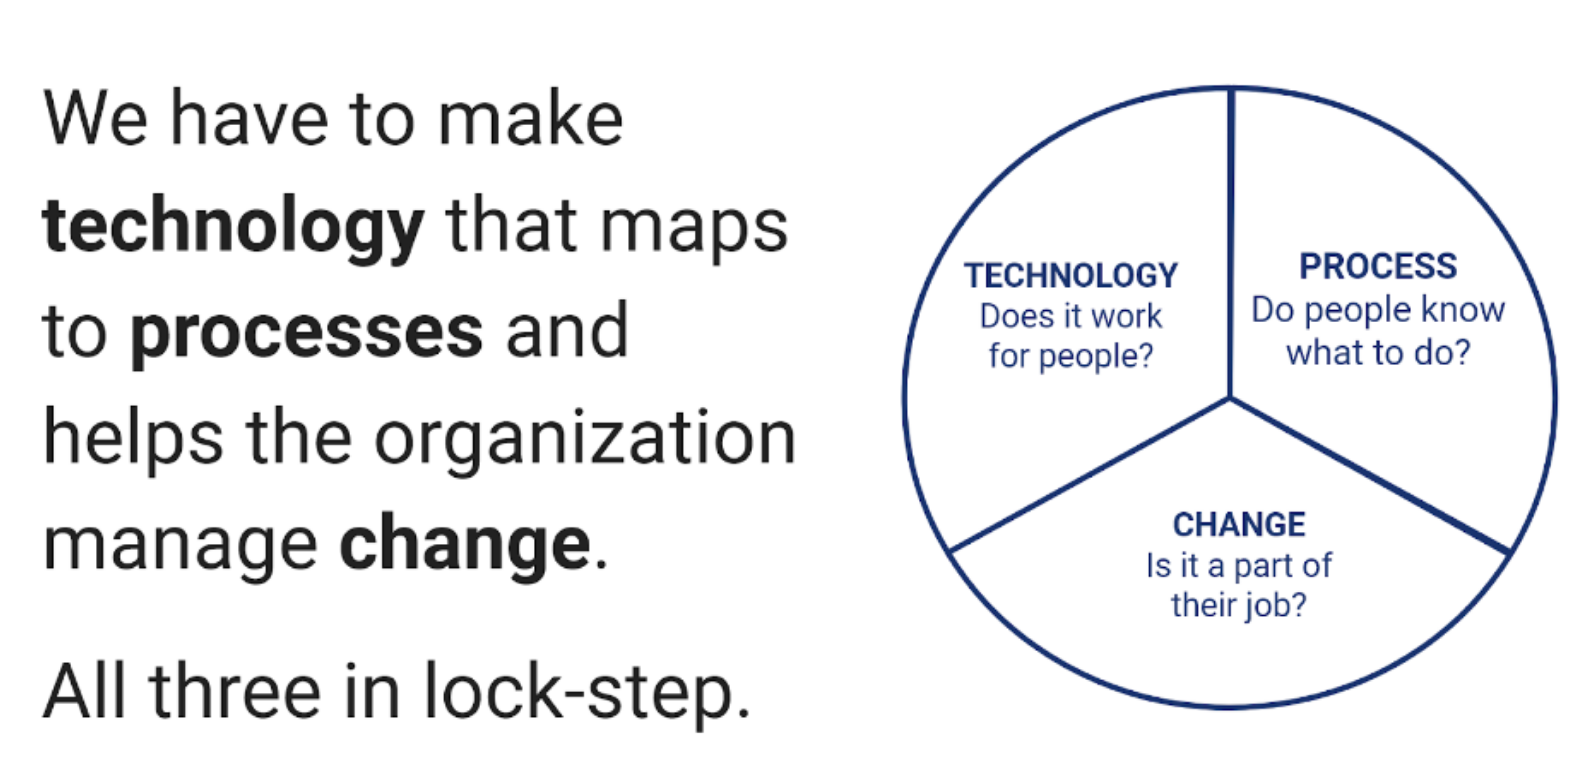 Technology, Process, and Change are the key elements in implementing software.